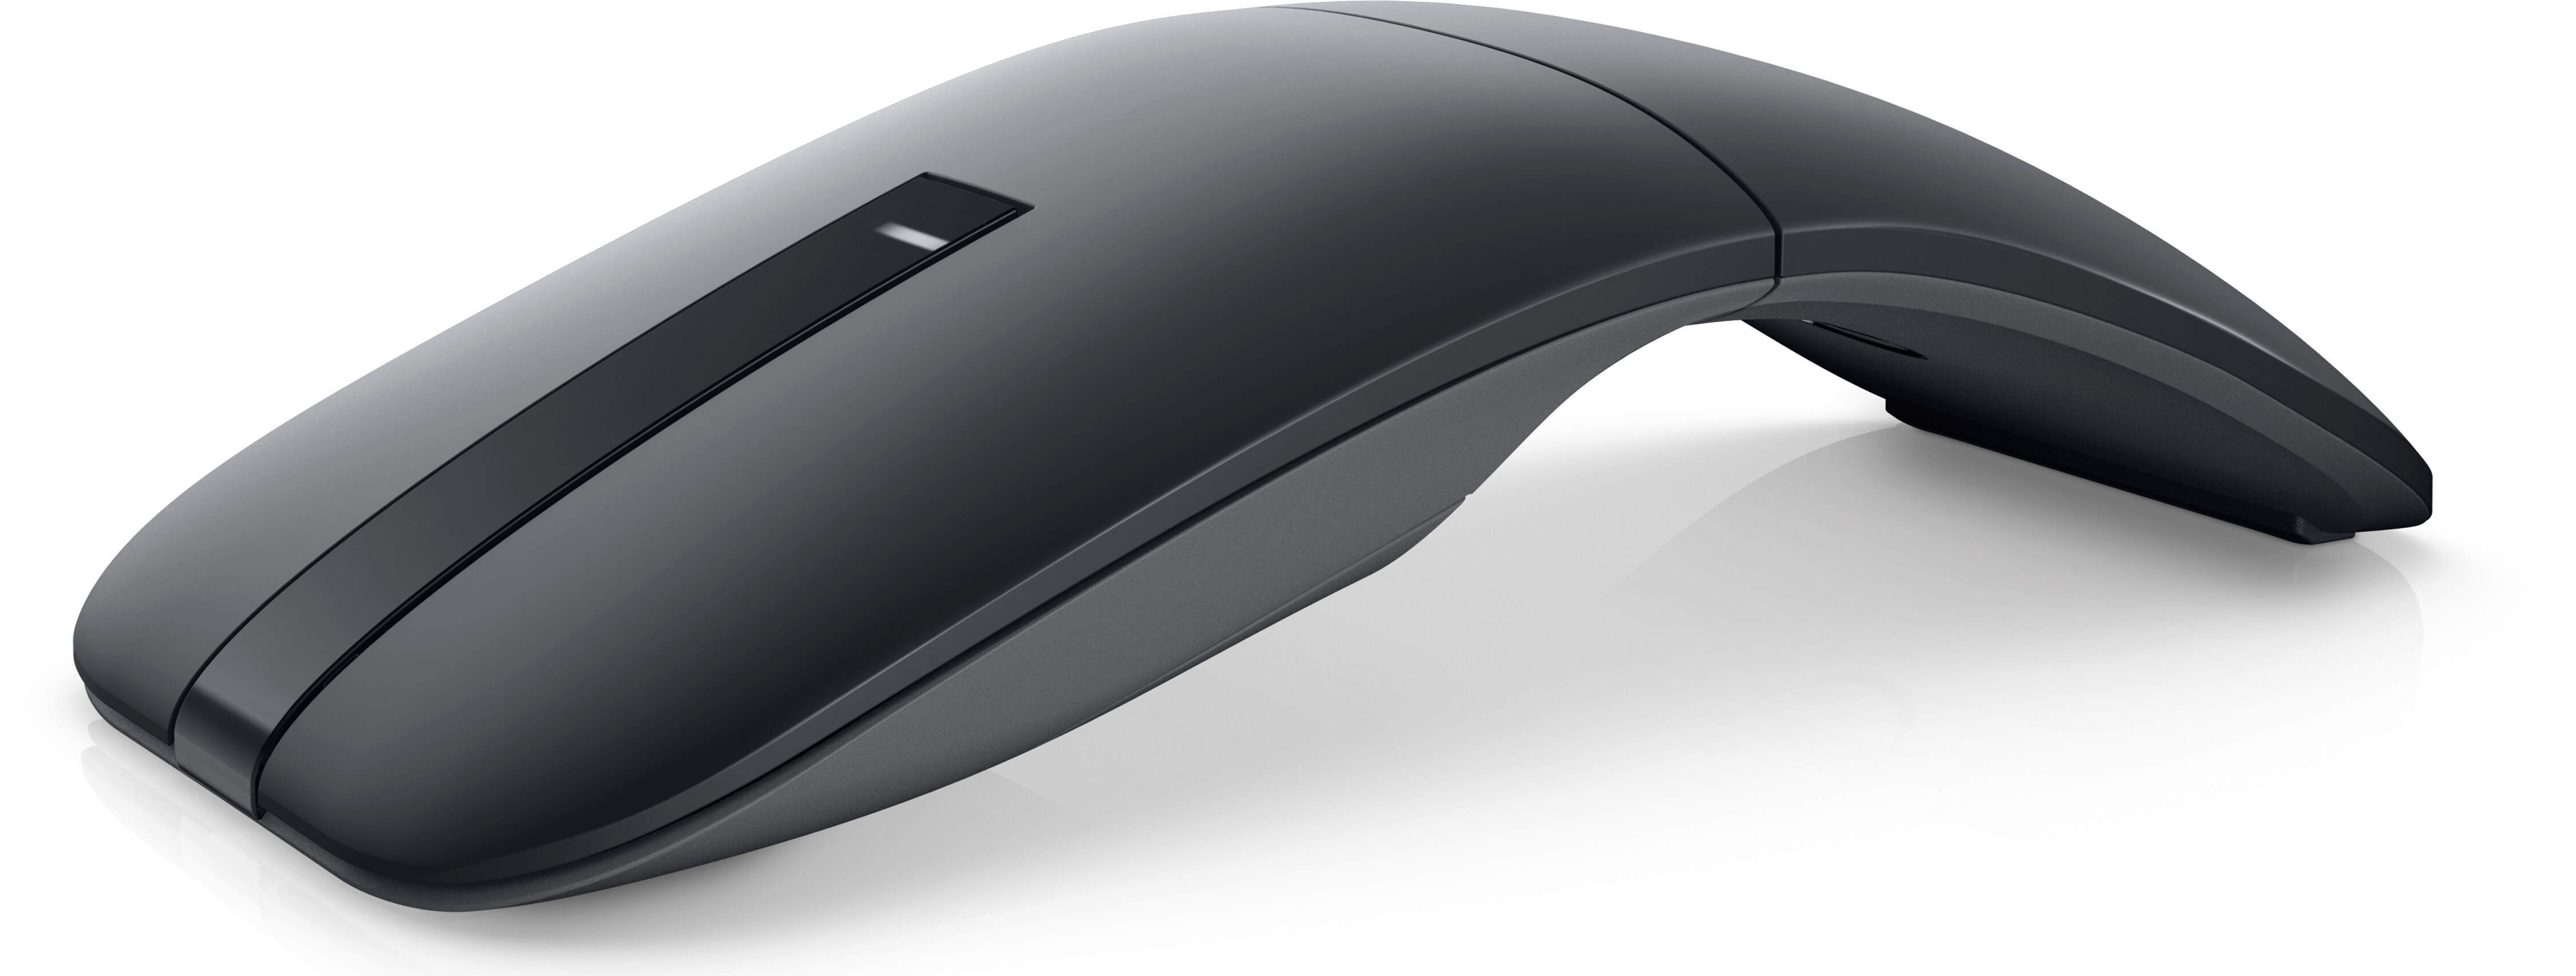 https://i.dell.com/is/image/DellContent/content/dam/ss2/product-images/dell-client-products/peripherals/mouse/dell-bluetooth-travel-mouse-ms700/media-gallery/black/mouse-ms700-black-gallery-1.psd?fmt=pjpg&pscan=auto&scl=1&wid=4500&hei=1705&qlt=100,1&resMode=sharp2&size=4500,1705&chrss=full&imwidth=5000